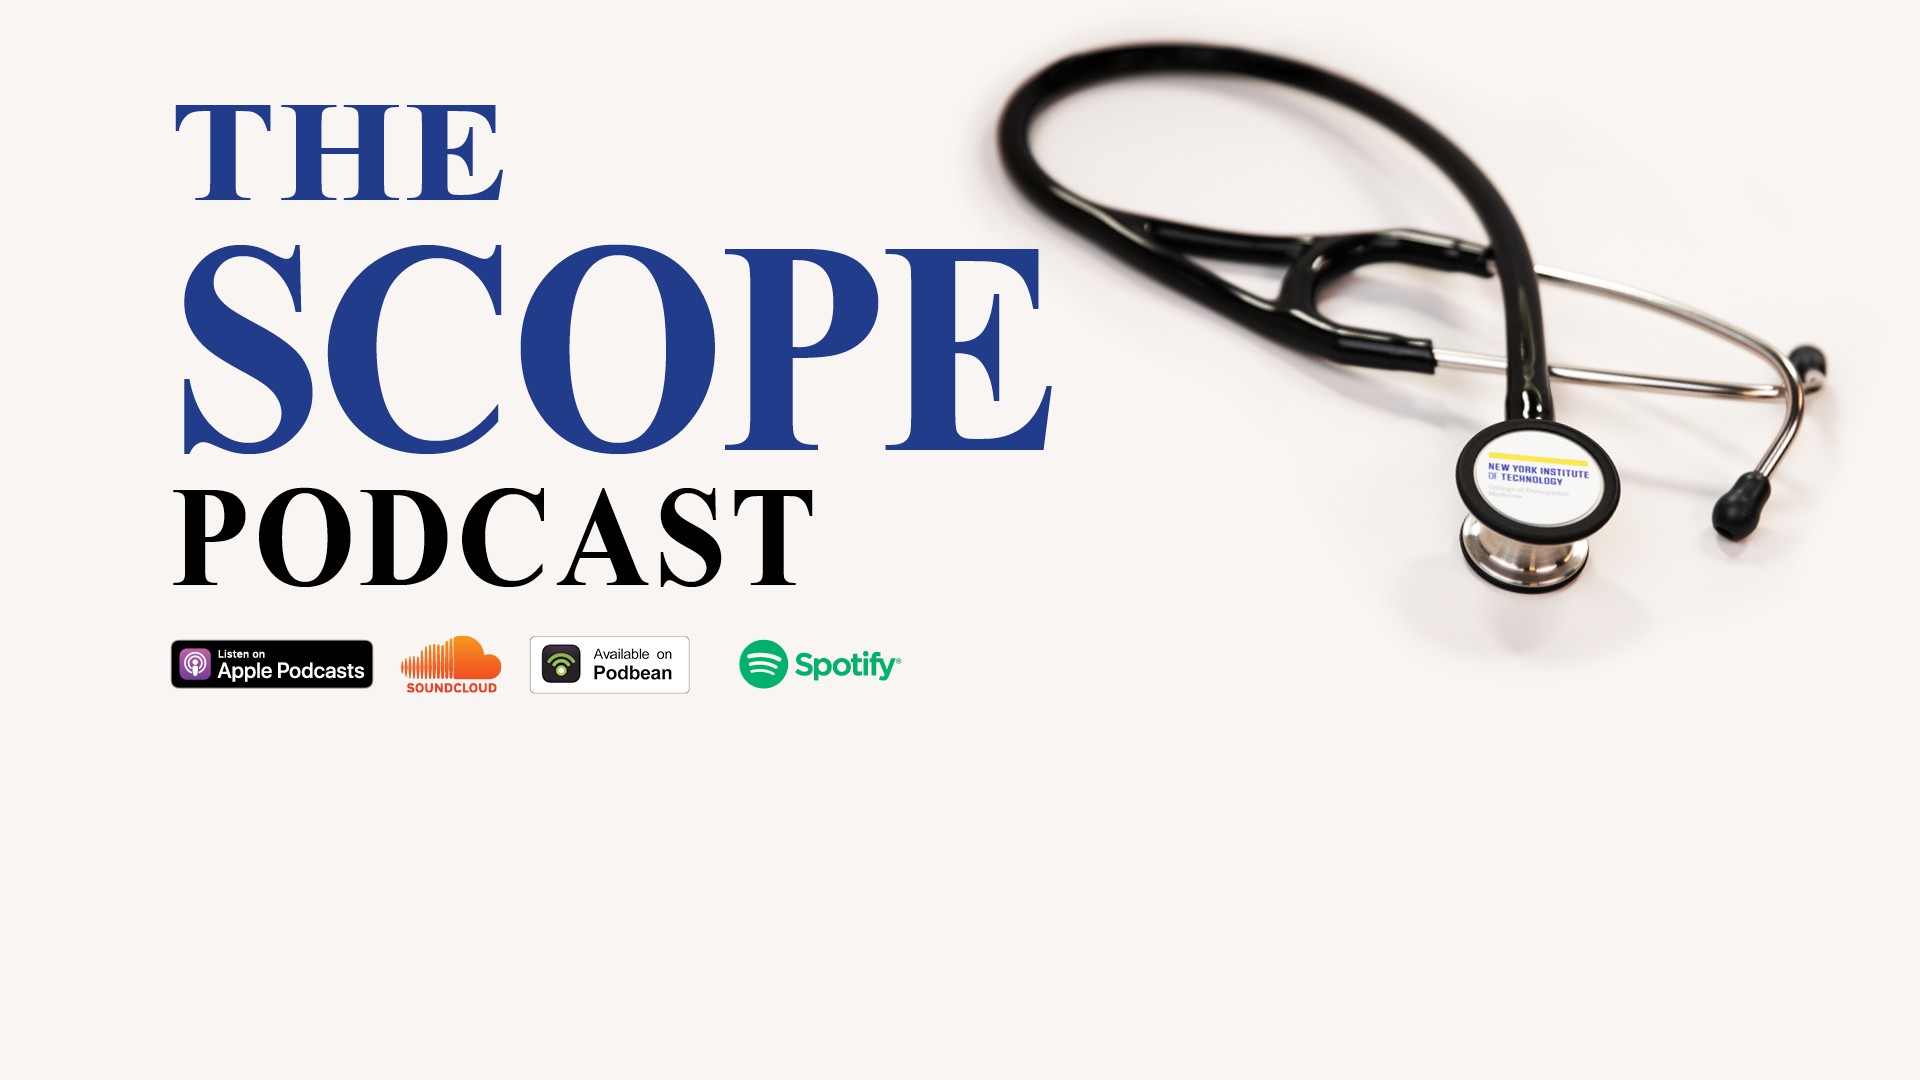 The Scope Podcast